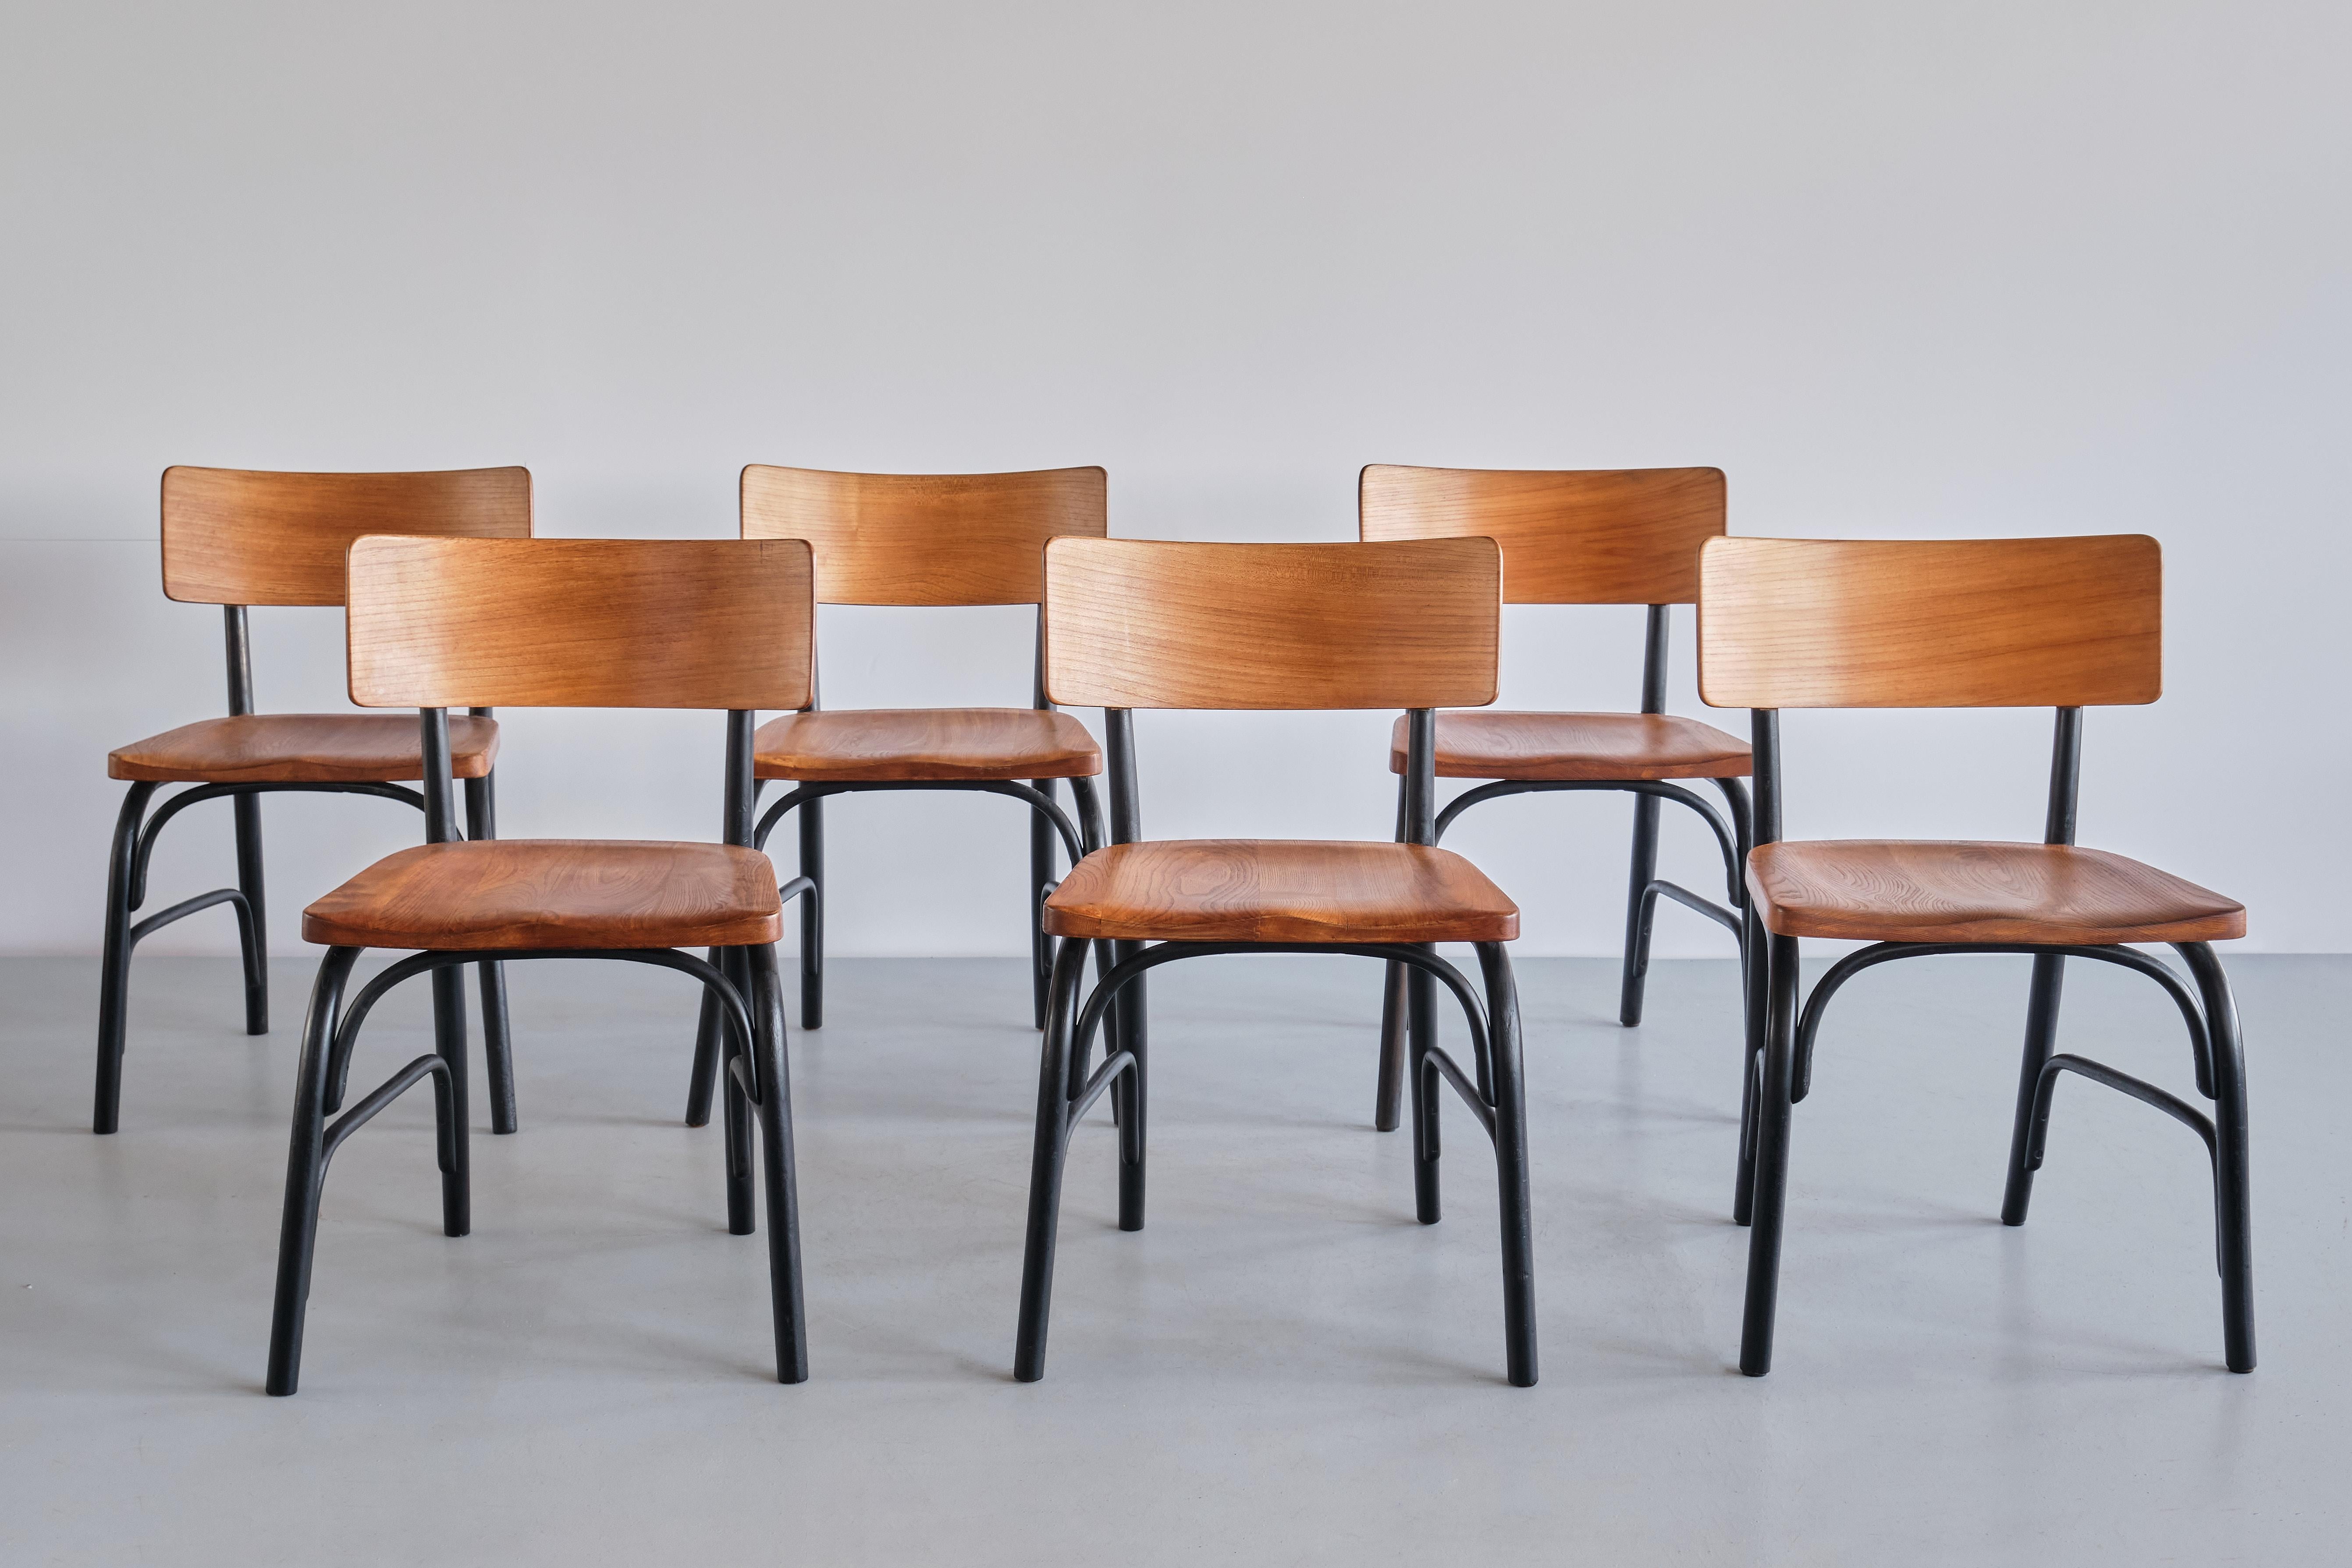 This rare set of six dining chairs was designed by the Danish designer and architect Frits Schlegel in the 1930s. This model 'Husum' chair was designed by Schlegel for the teacher's room of a school in Husum, located in the outskirts of Copenhagen.